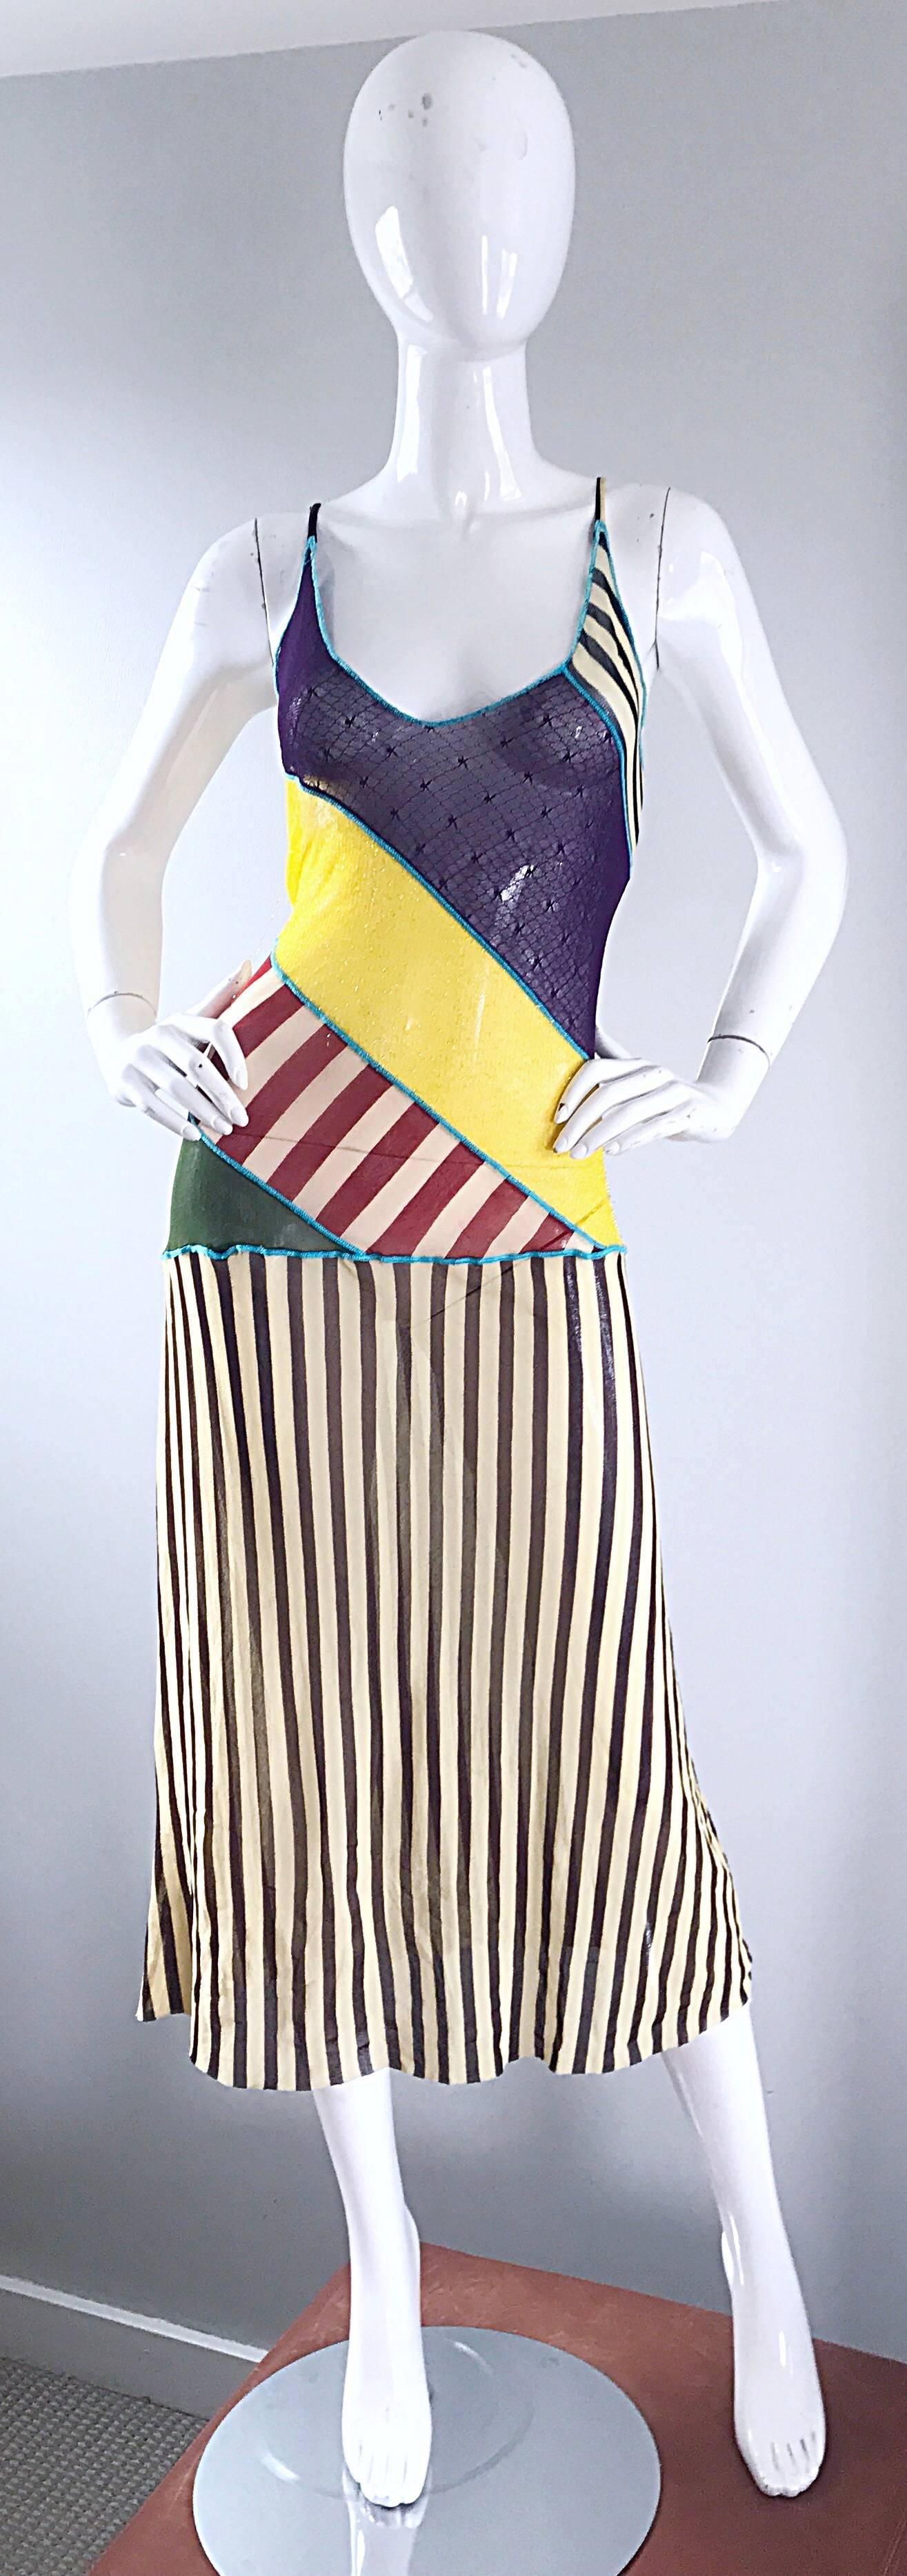 Rare 1990s does 1920s JEAN PAUL GAULTIER mixed media striped spaghetti strap flapper style sheer dress! Features color block and stripe prints in purple, yellow, turquoise, black, brown, ivory, burgundy and green throughout. Gold metallic silk